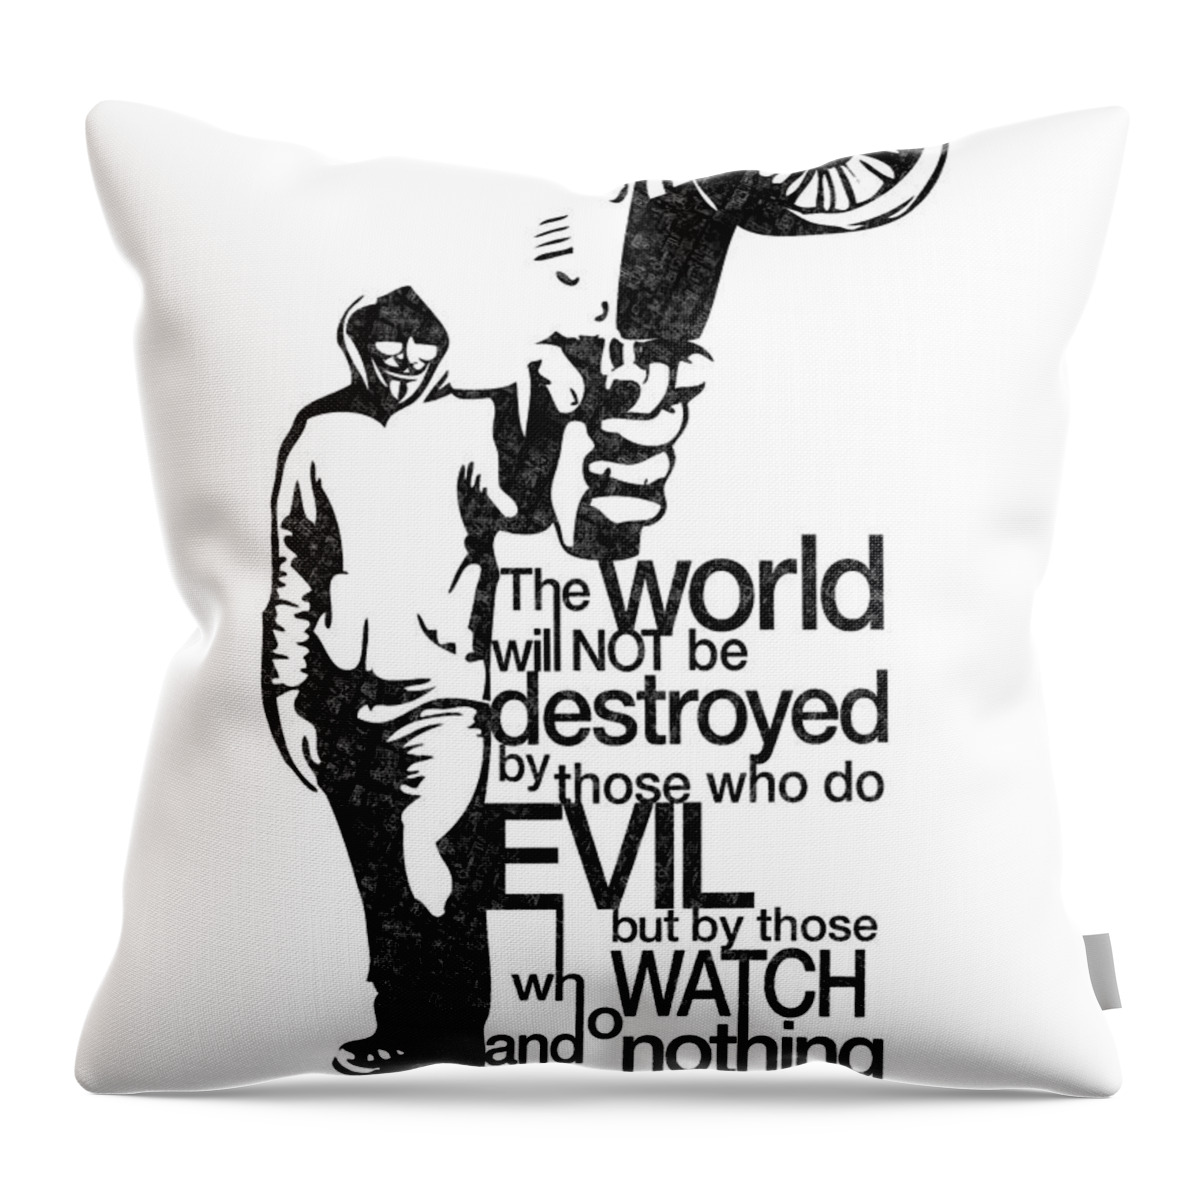 Quote Throw Pillow featuring the digital art Eyes Wide Open by Sassan Filsoof